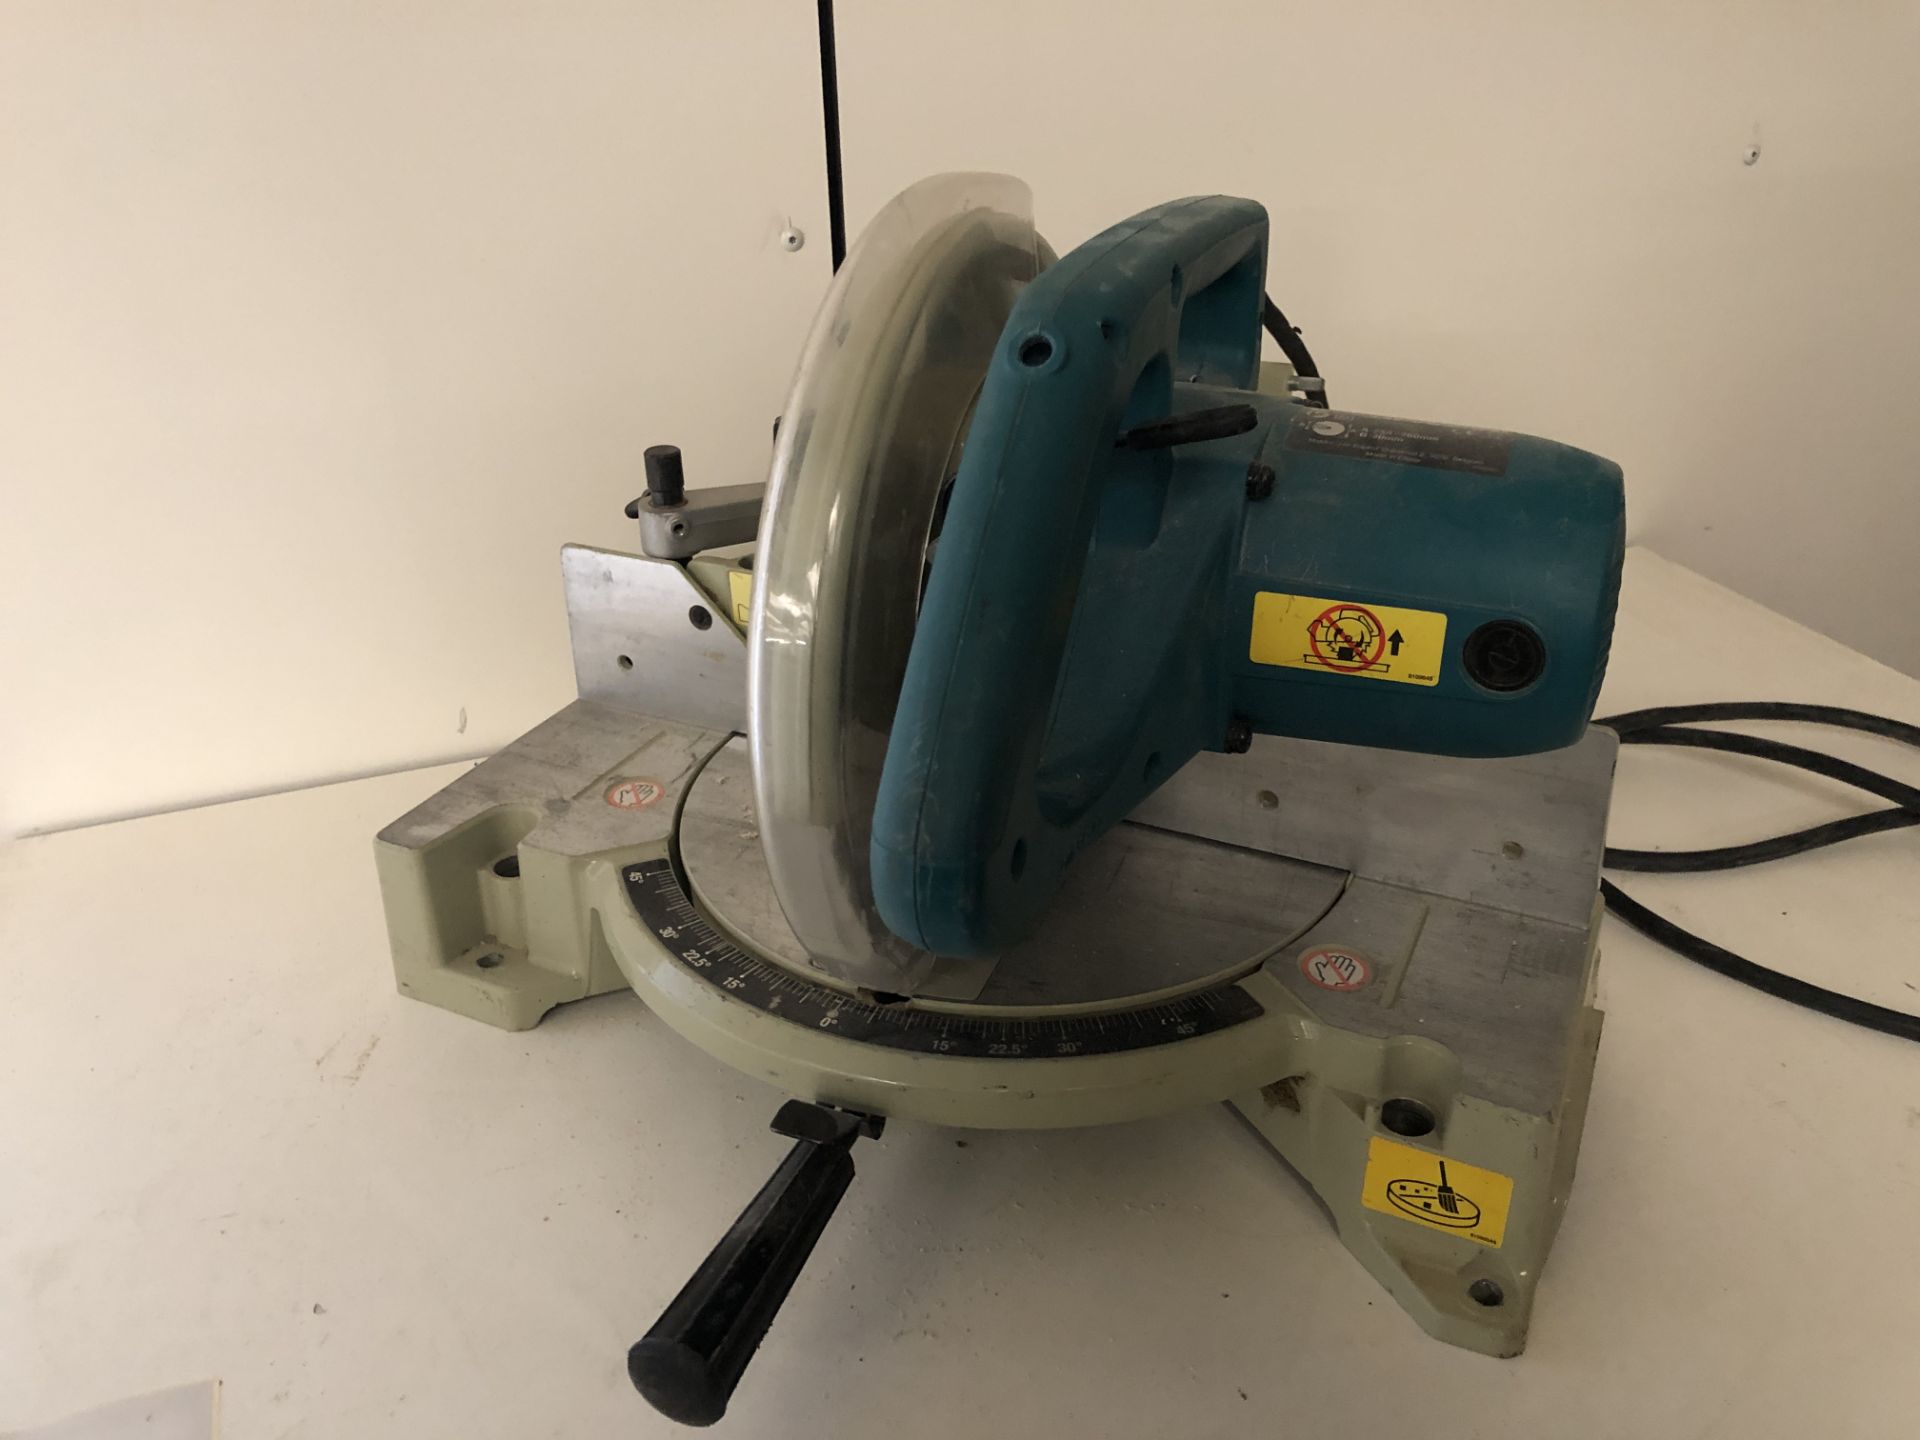 Matika LS1040 (2105) Saw 110v Serial No: 009677K (Please Note: Collection by appointment Tuesday - Image 3 of 6